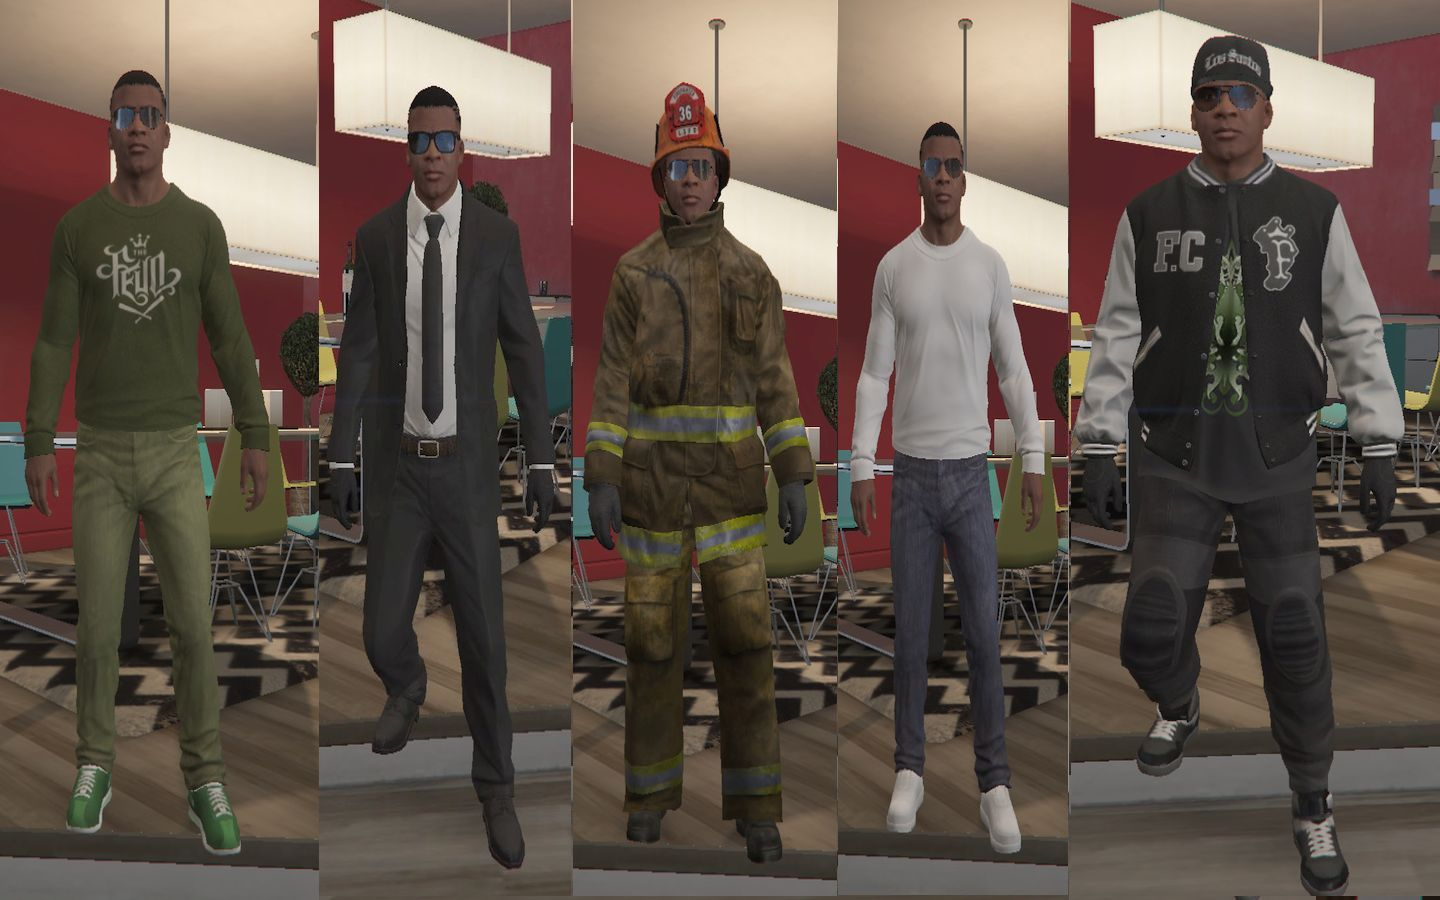 https://img.gta5-mods.com/q95/images/outfits-for-micheal-franklin-and-trevor/f9cfe1-3.jpg